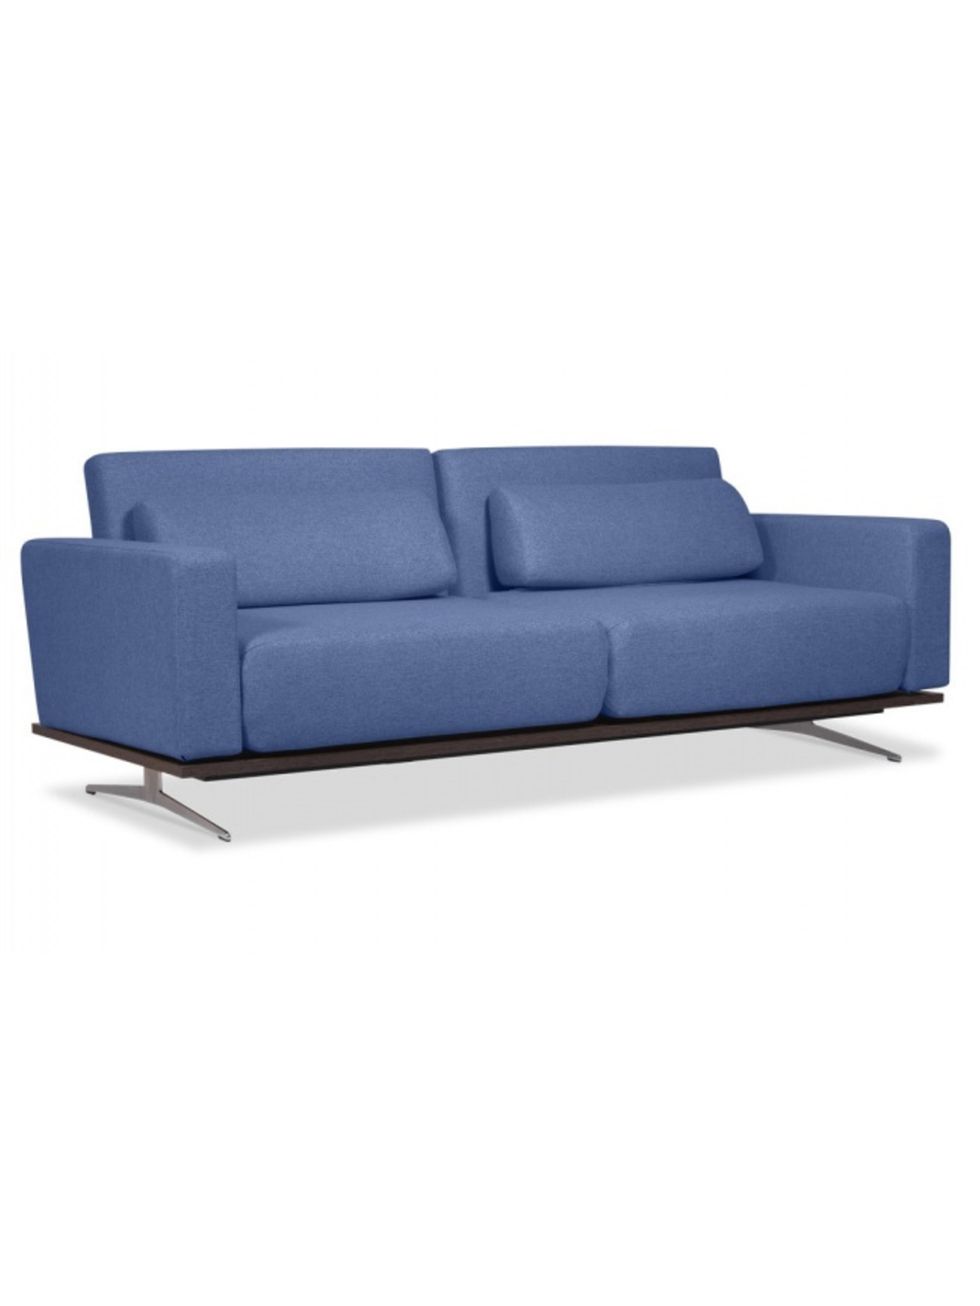 Blue, Furniture, Couch, Style, Outdoor furniture, Rectangle, Azure, Black, Electric blue, Cobalt blue, 